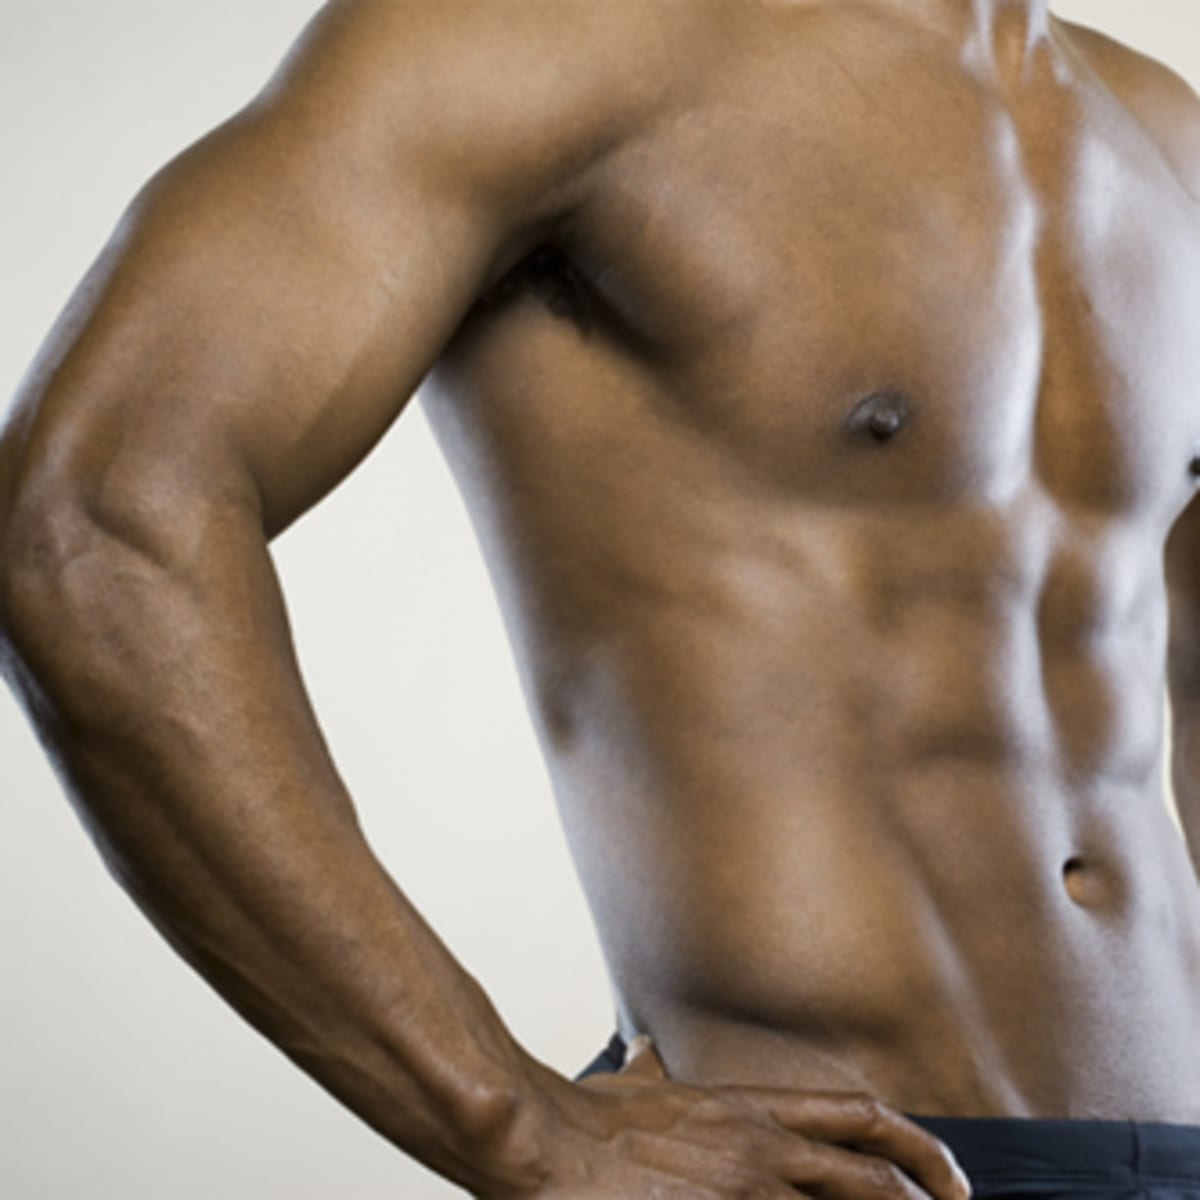 How To Get Toned: The No-Nonsense Guide to Building Lean Muscle